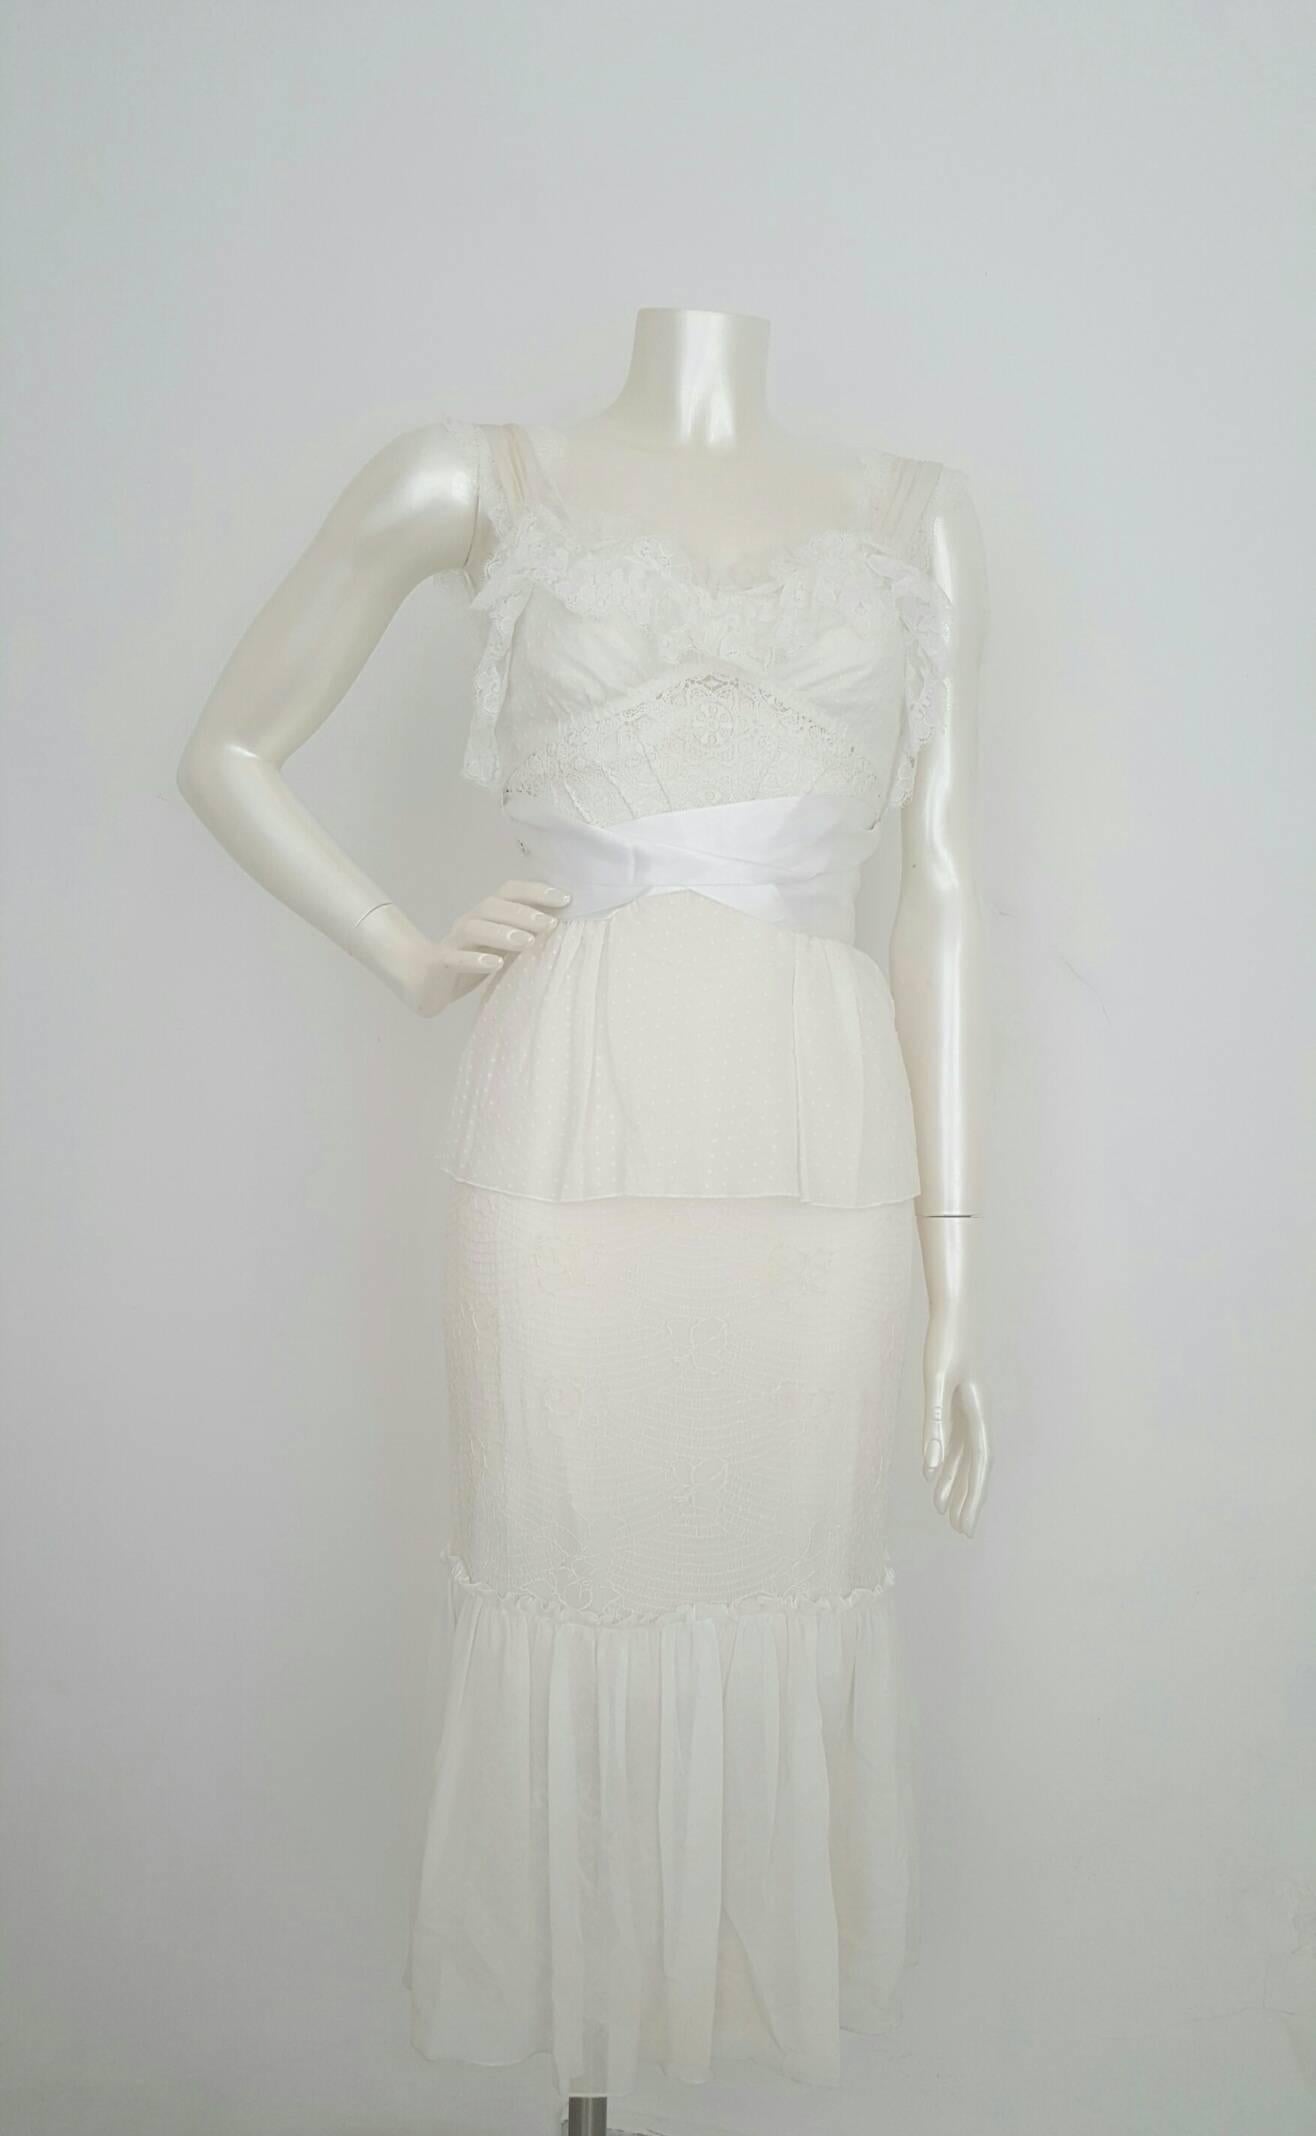 1990s Dolce & Gabbana White dress totally made in italy in italian size range 40
still with tags original price was 2250,00
composition: 58 cotton 10 elatane 2 nylon 10 silk 20 rayon
lining 100 silk